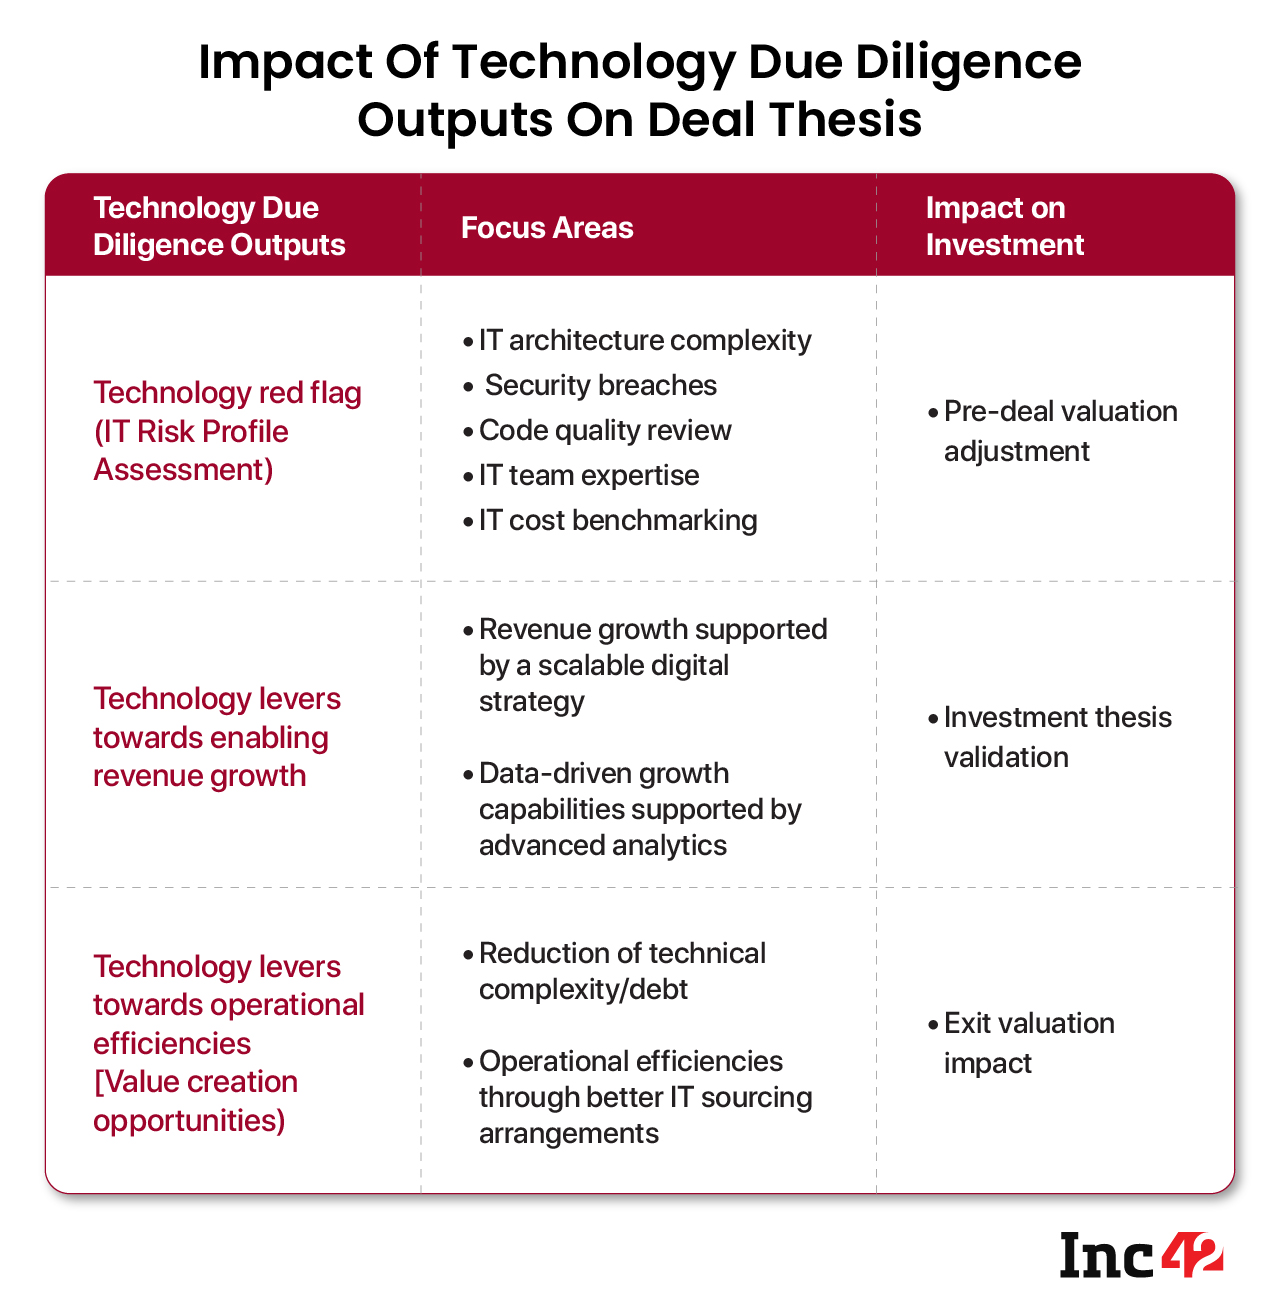 Impact Of Technology Due Diligence Outputs On Deal Thesis